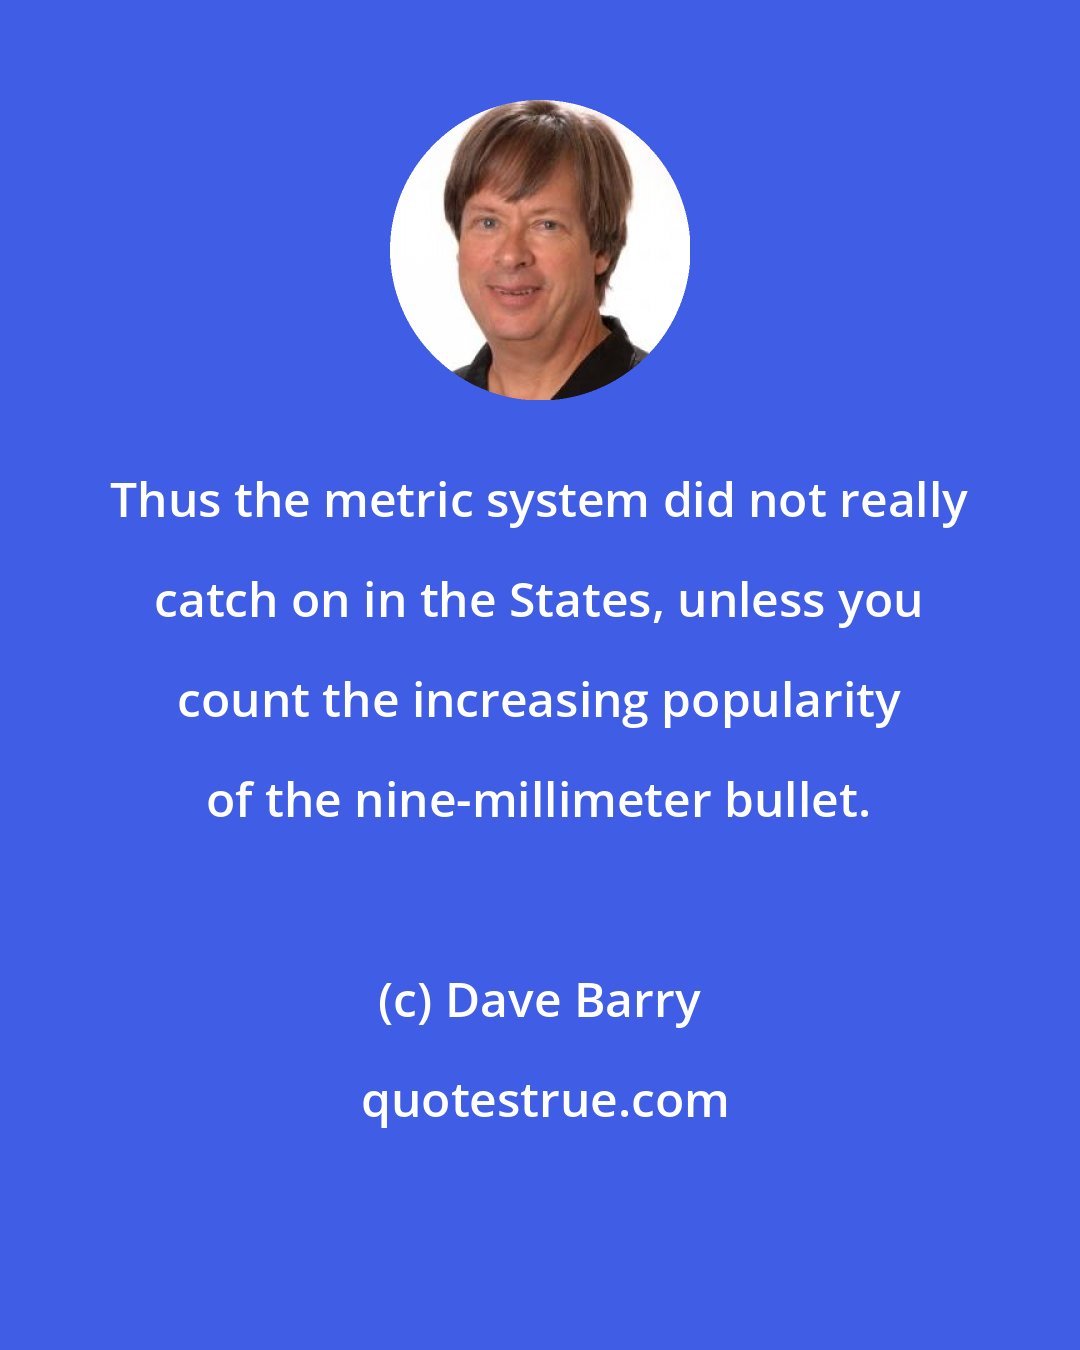 Dave Barry: Thus the metric system did not really catch on in the States, unless you count the increasing popularity of the nine-millimeter bullet.